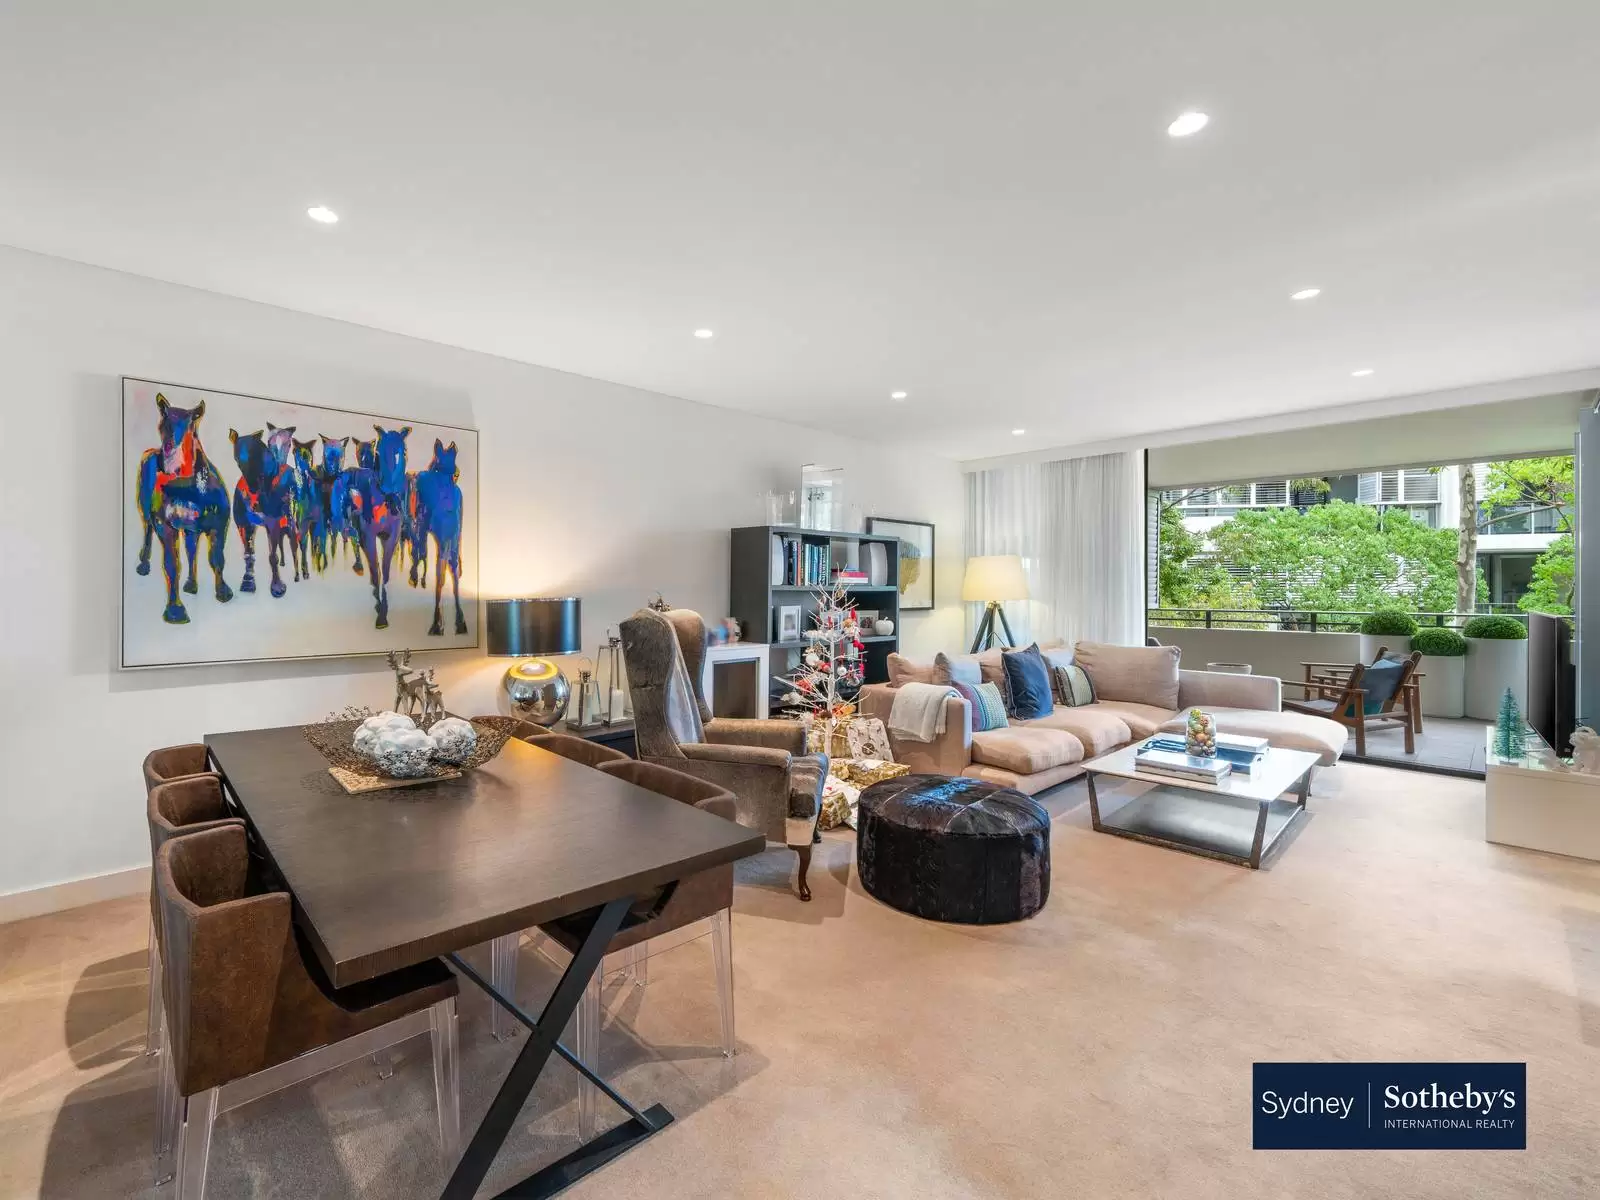 3312/12 Neild Avenue, Rushcutters Bay Leased by Sydney Sotheby's International Realty - image 2